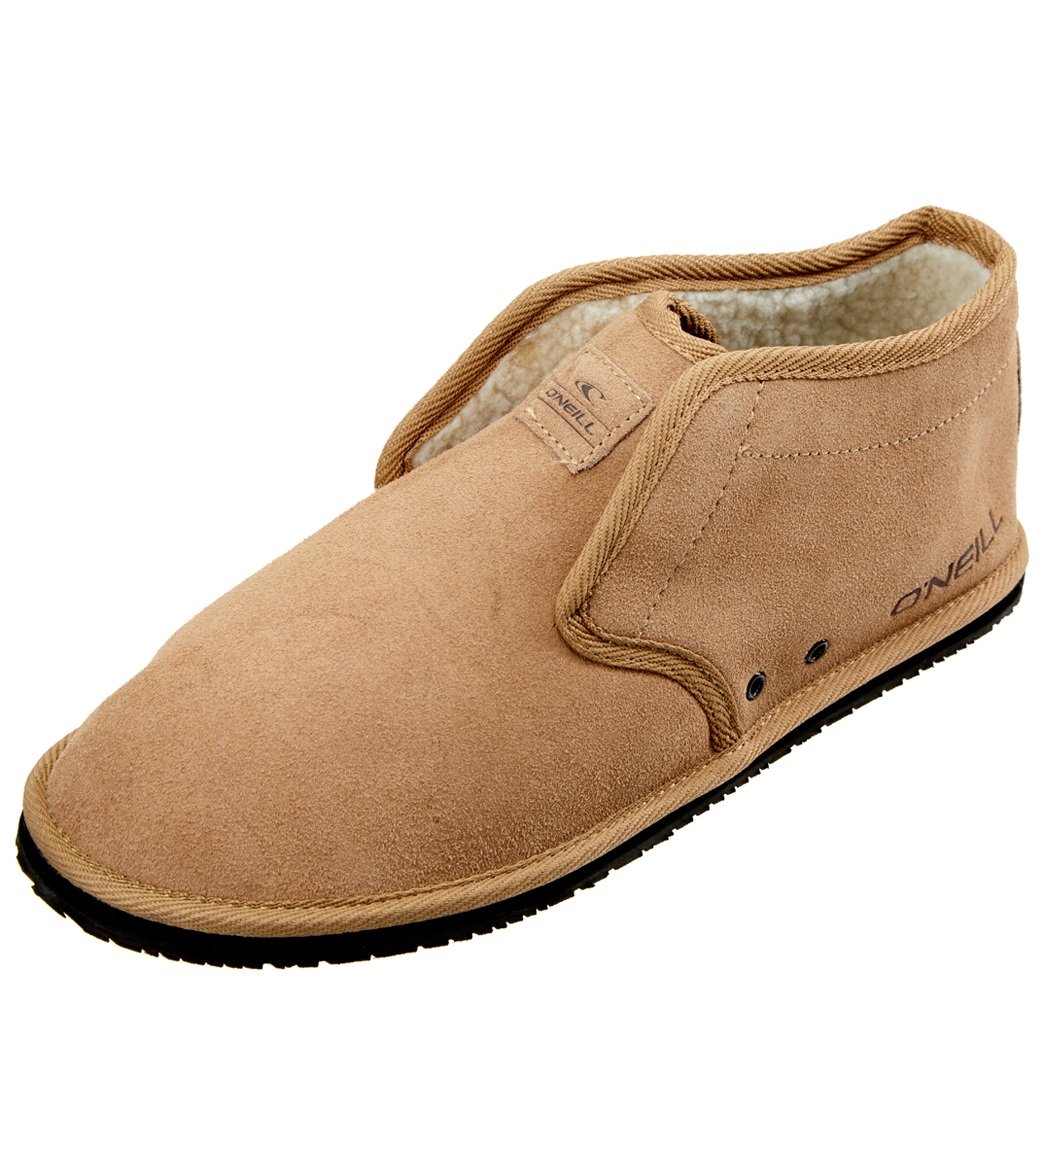 O'Neill Men's Surf Turkey Suede Slipper at SwimOutlet.com - Free Shipping